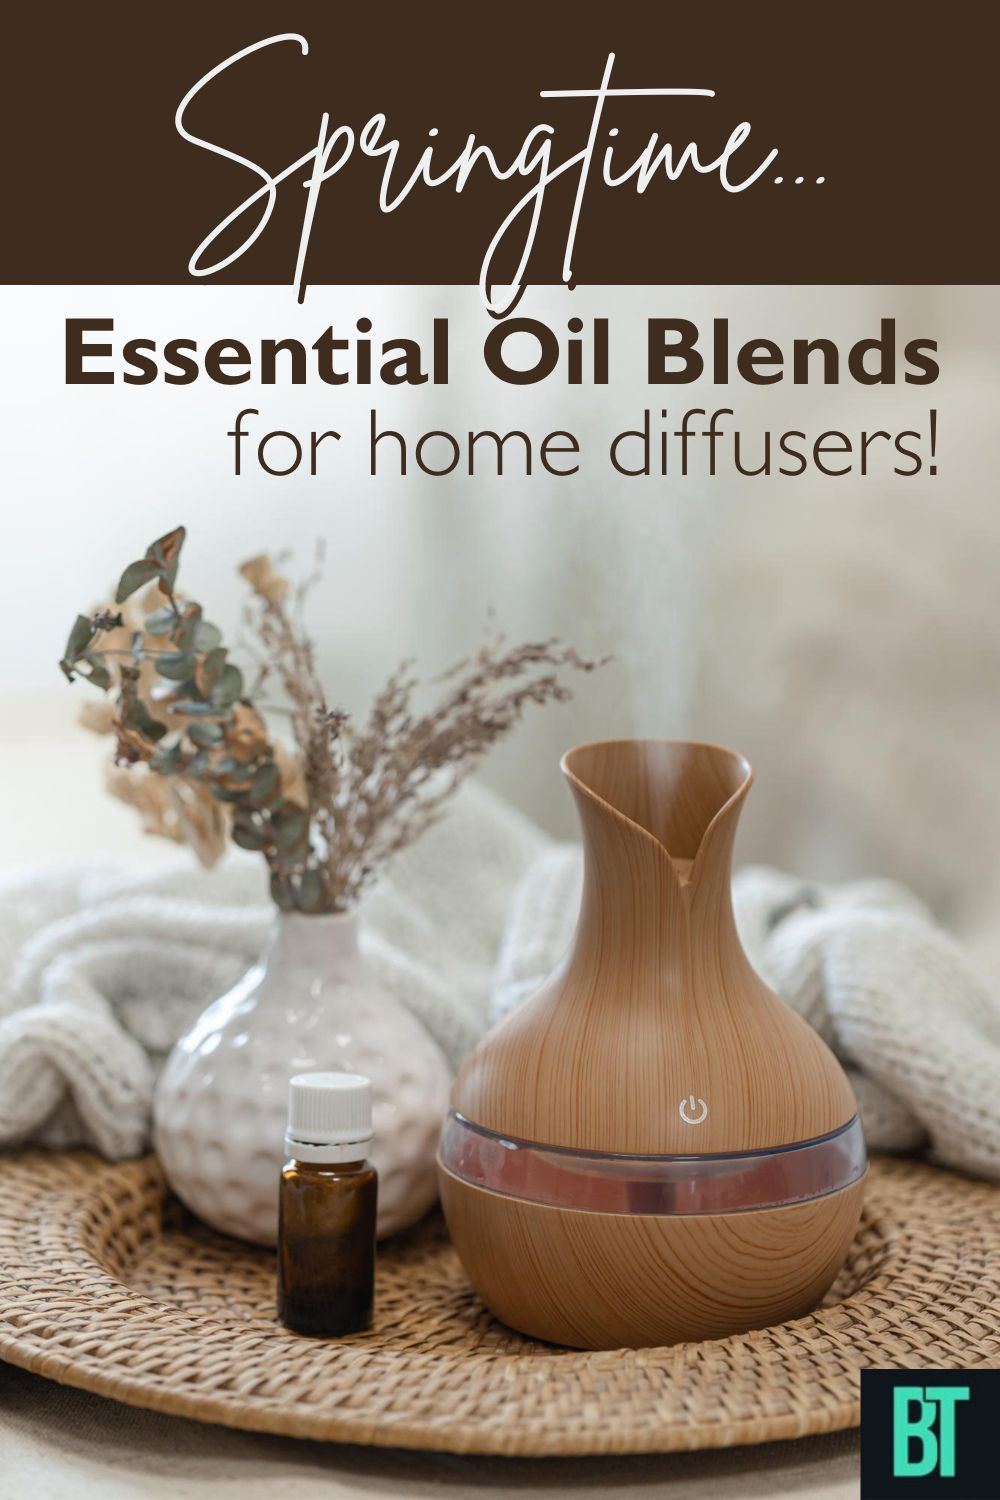 Discover the Perfect Spring Essential Oil Blends for Your Home Diffuser!